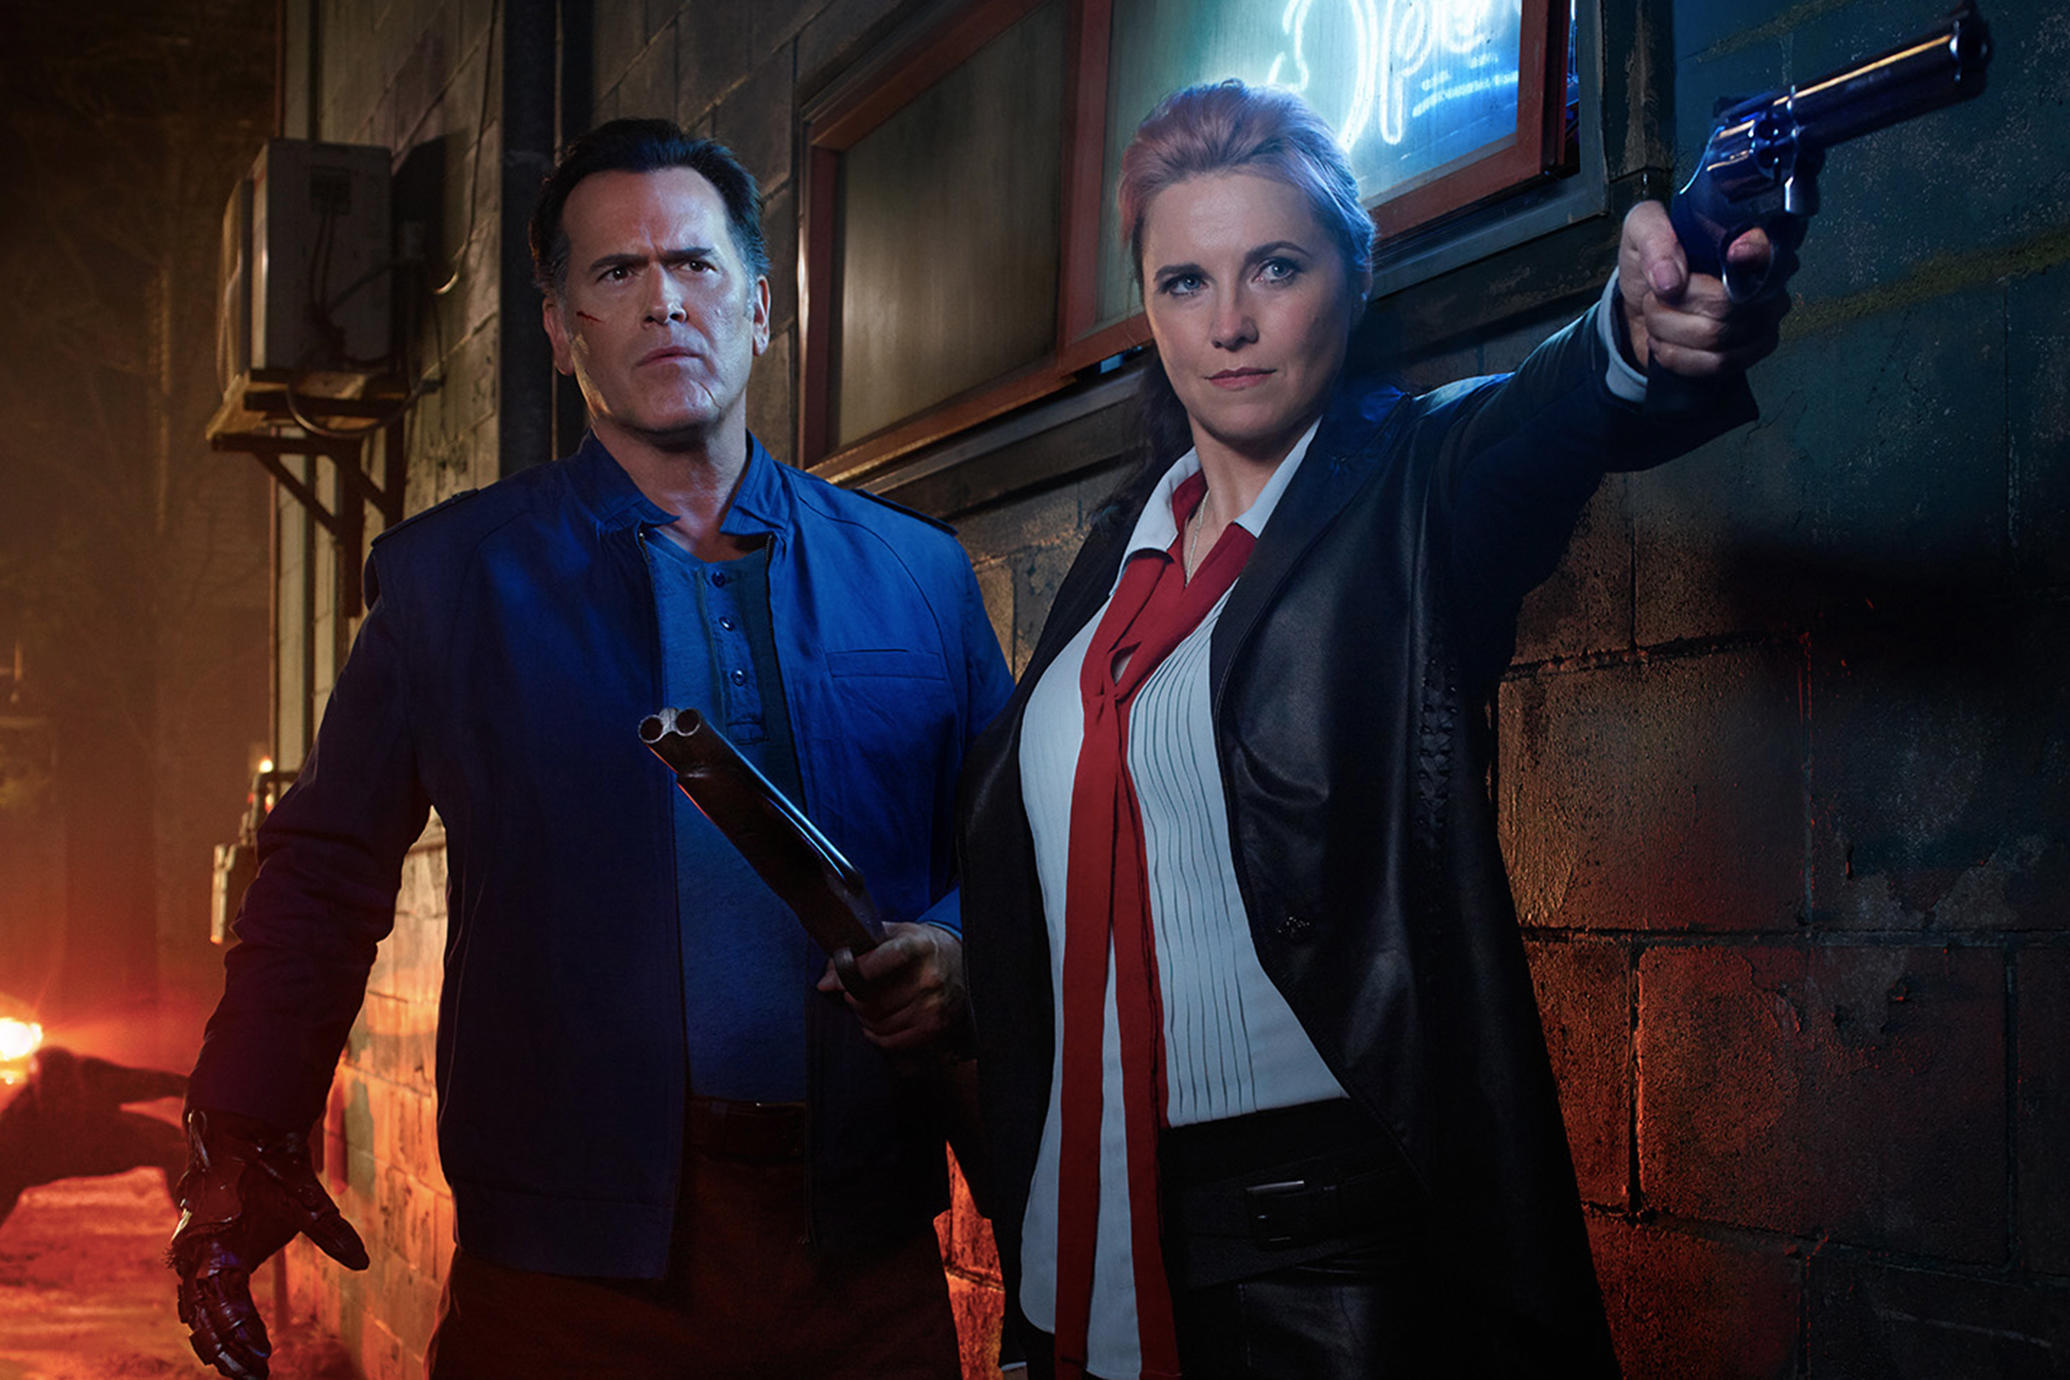 160801-news-ash-vs-evil-dead-bruce-campbell-lucy-lawless